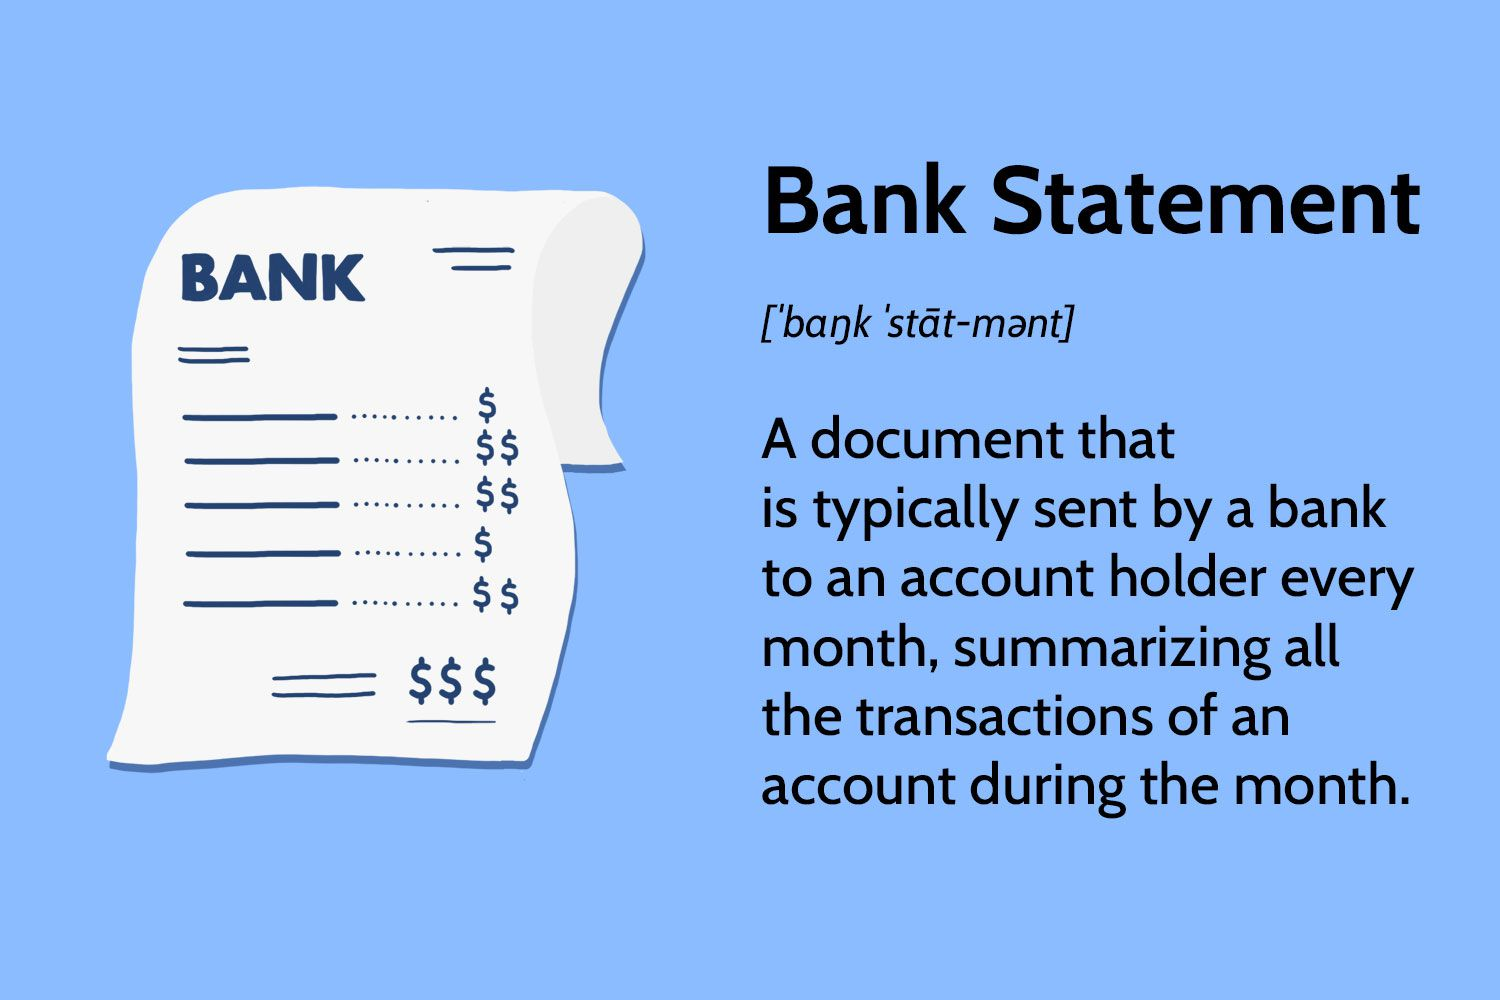 Bank statement explained